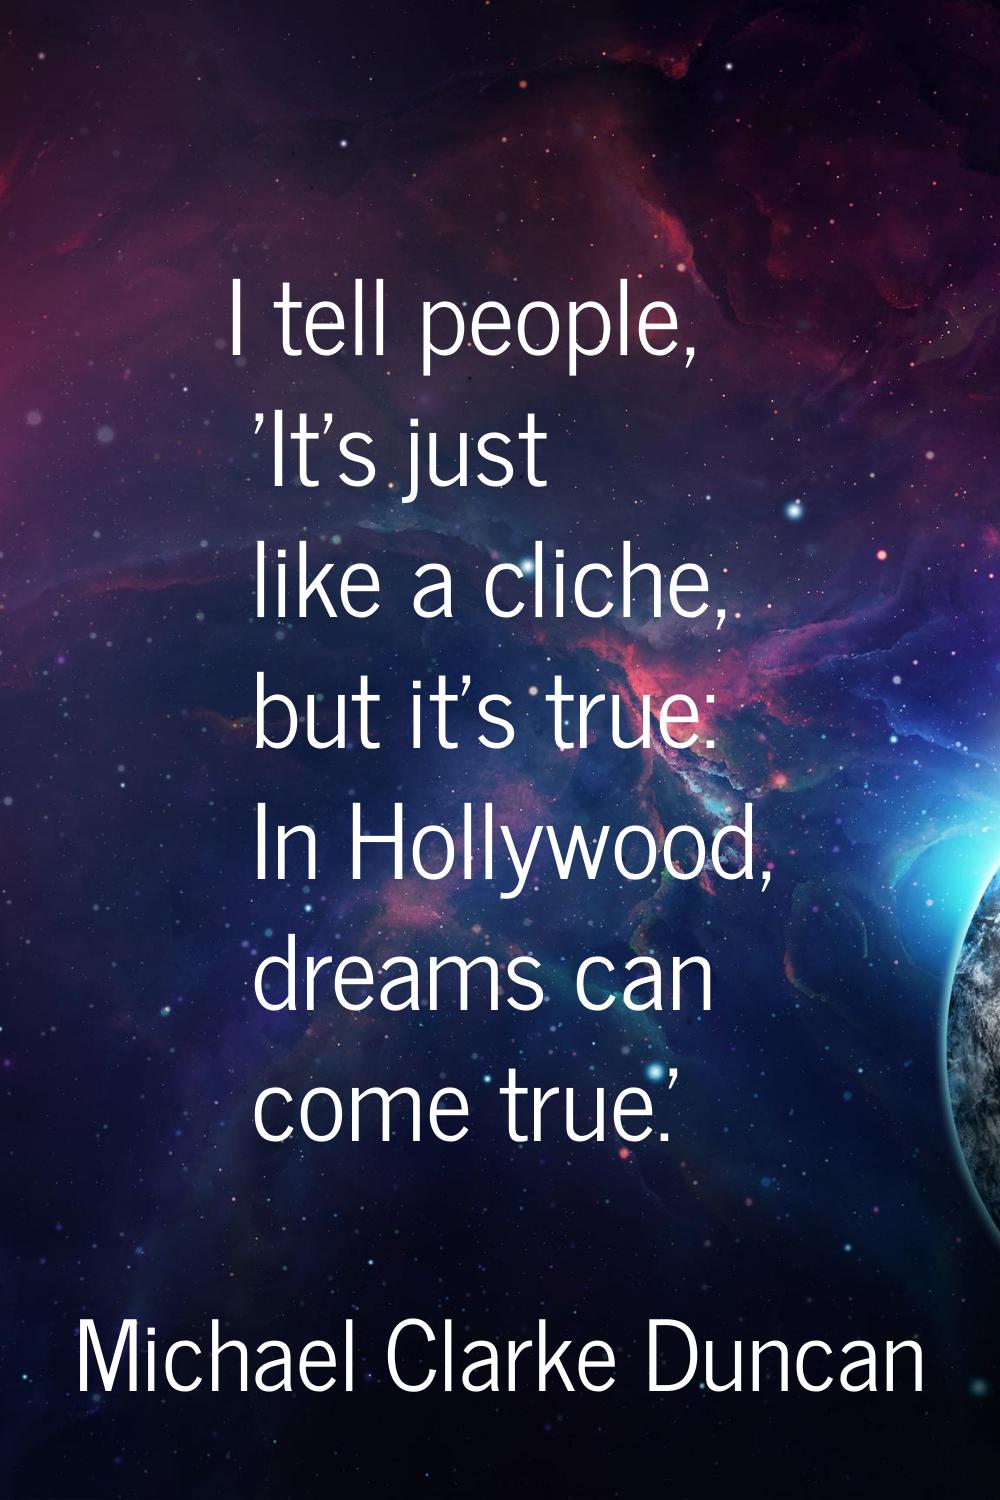 I tell people, 'It's just like a cliche, but it's true: In Hollywood, dreams can come true.'